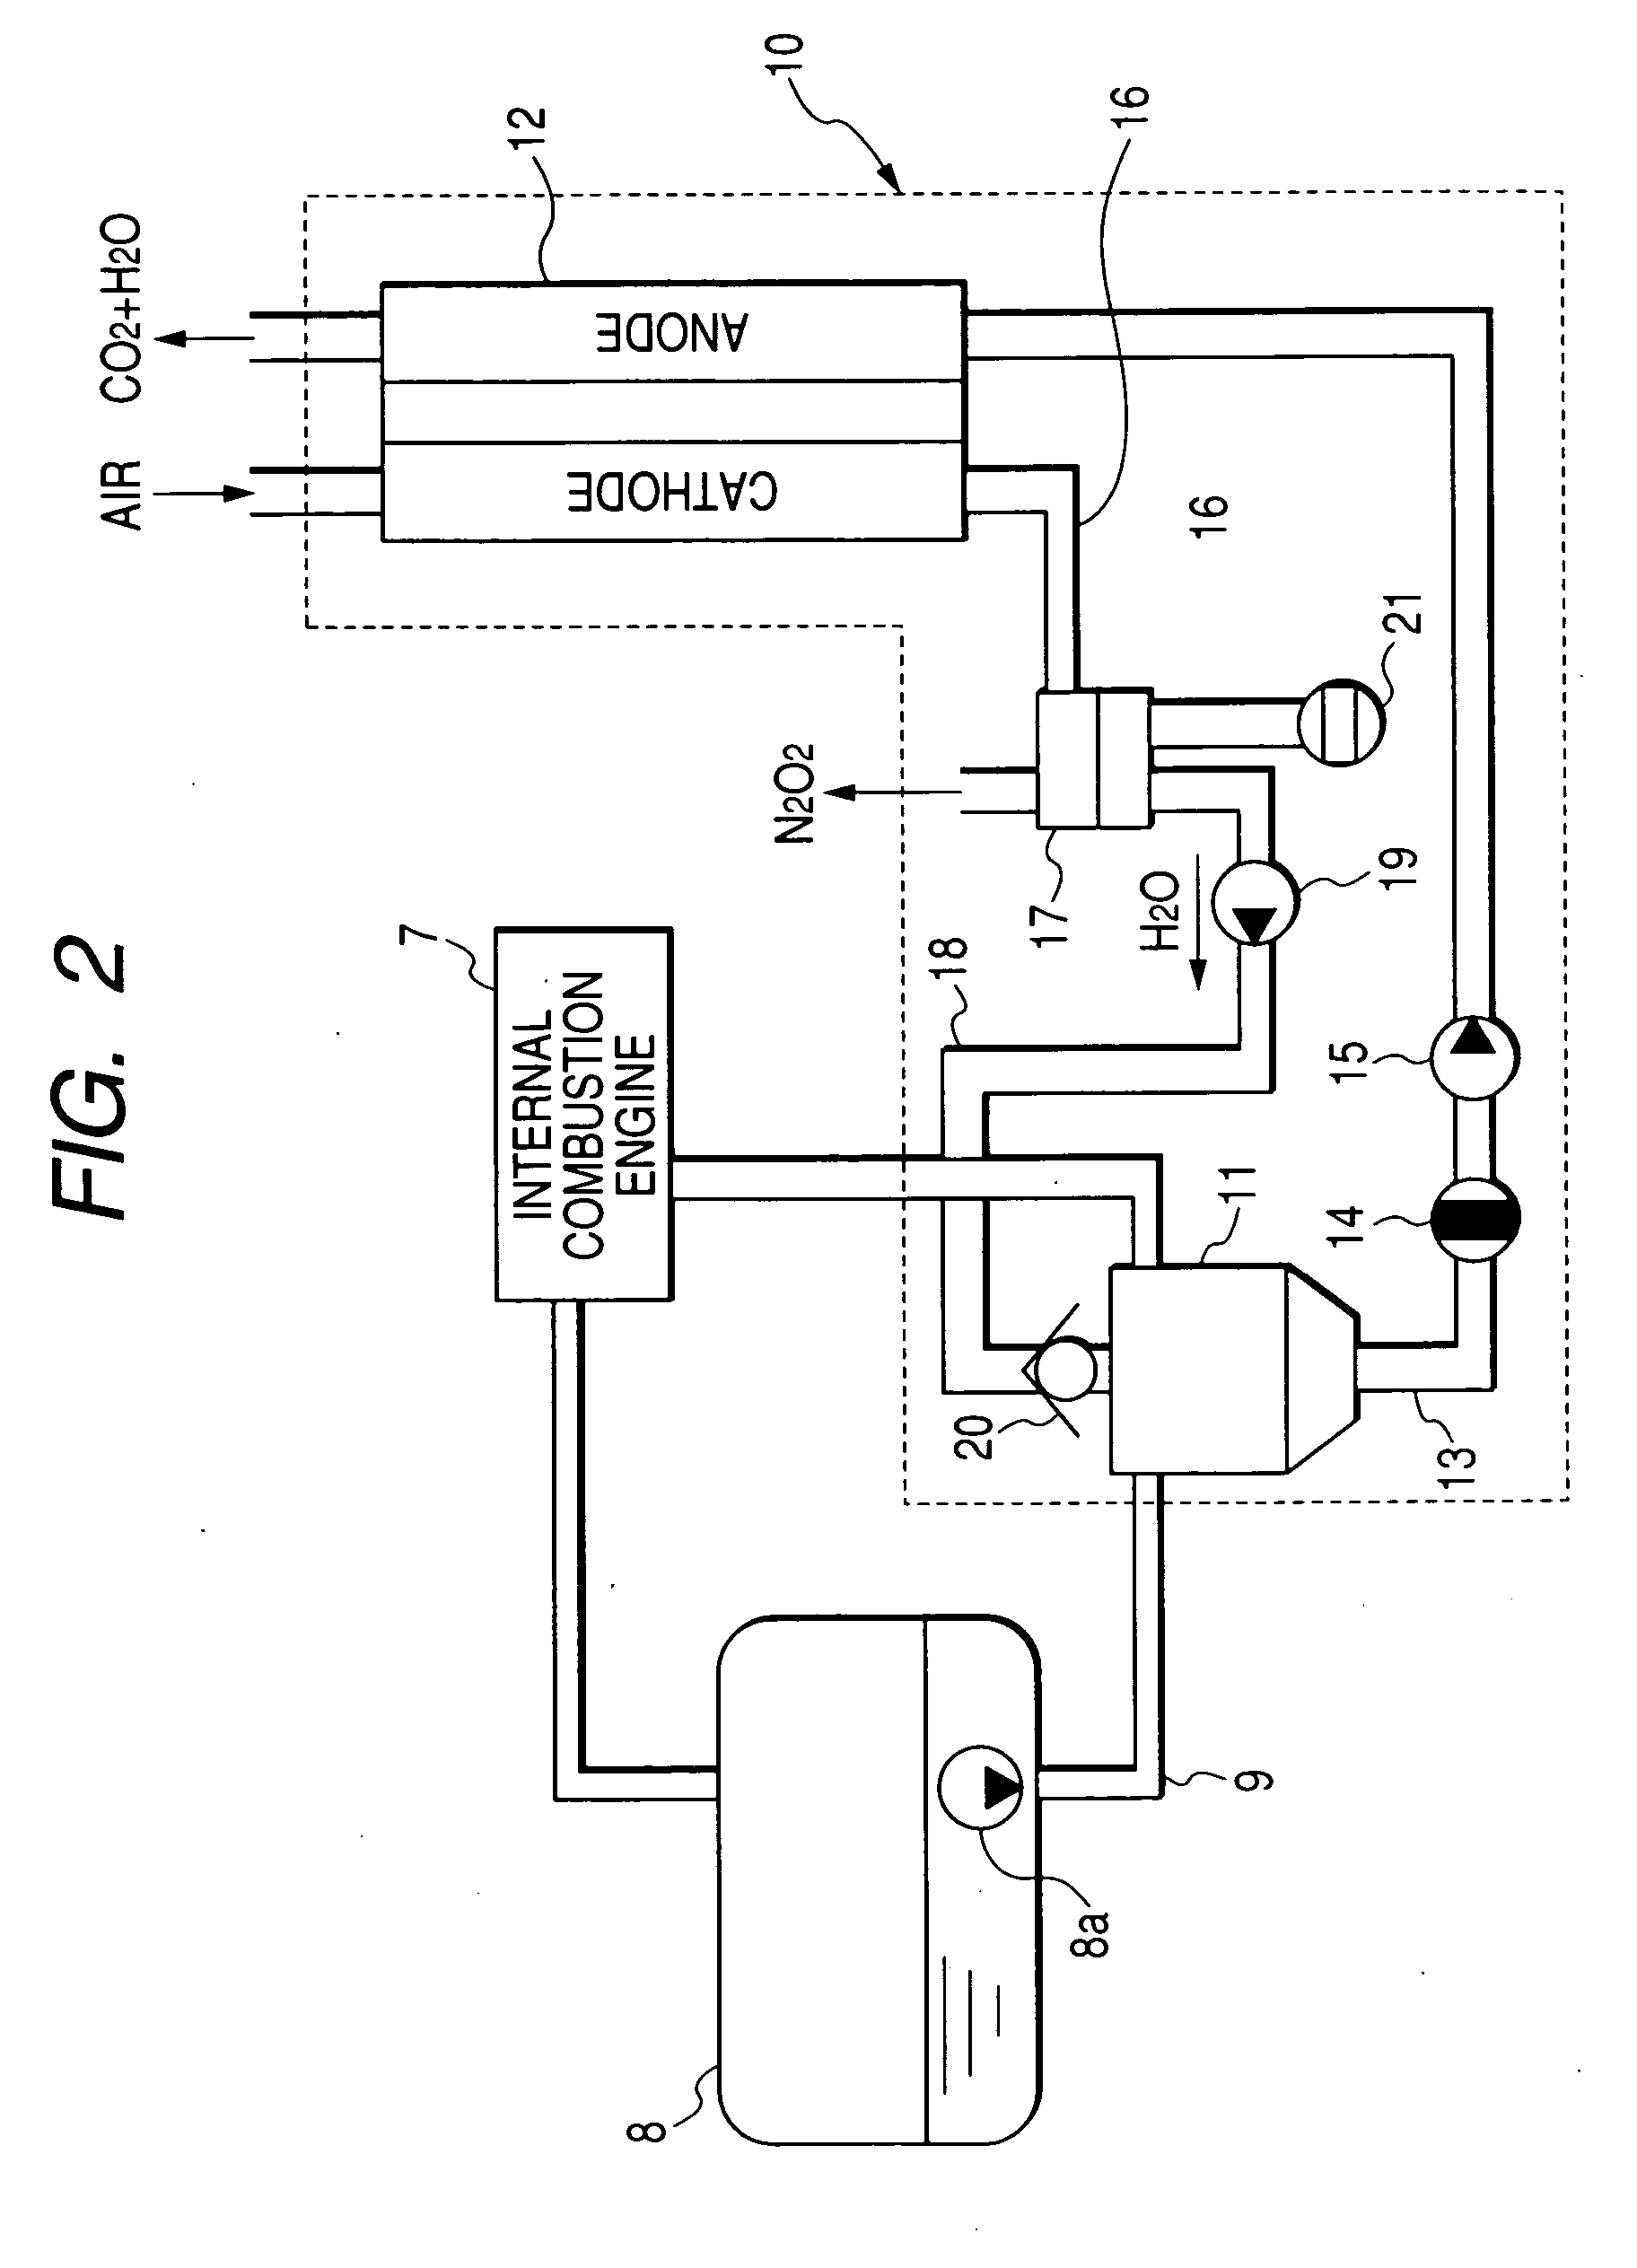 Electric power generation system for vehicle